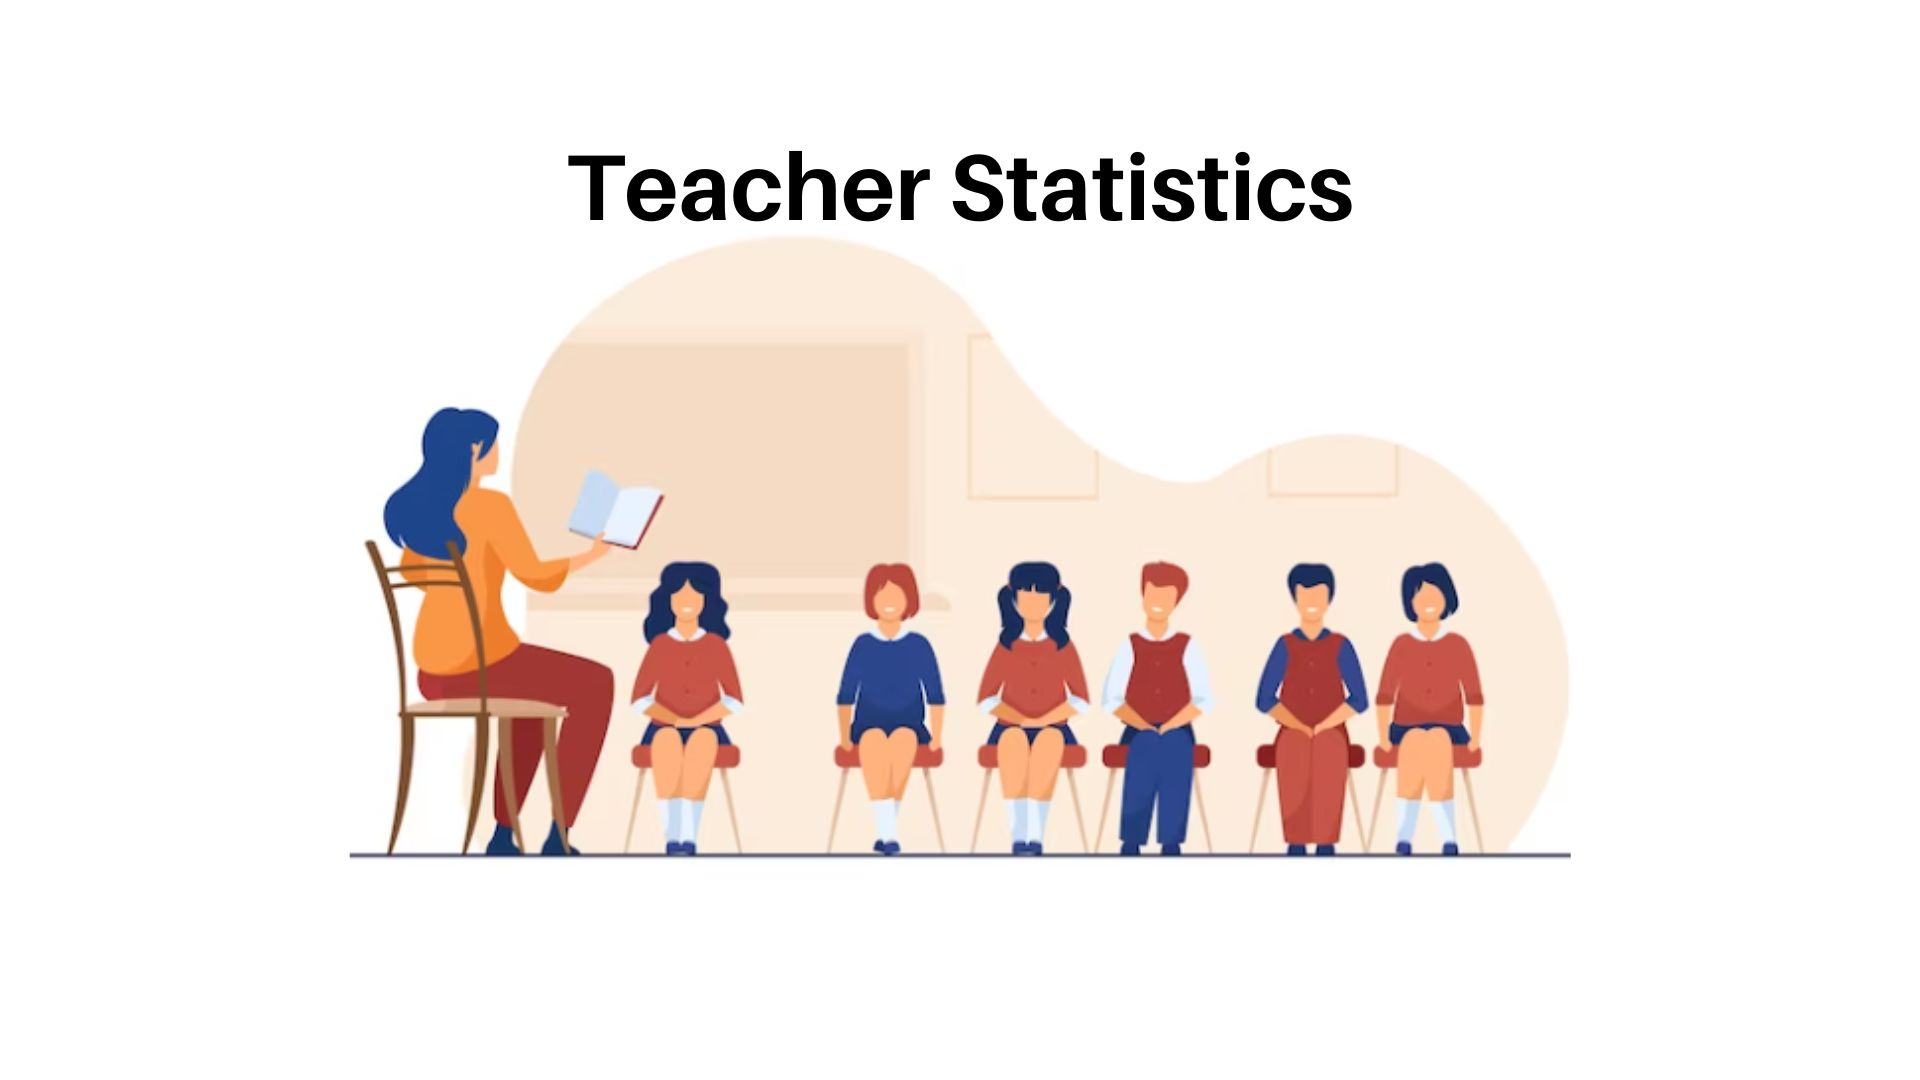 Teacher Statistics By Education Level, Demographics, Country Wise Time Spend, Salary, Workload, Grade Level, Social Media, Shortage, Vacancy, Reason of Leaving Job and Technology Trends